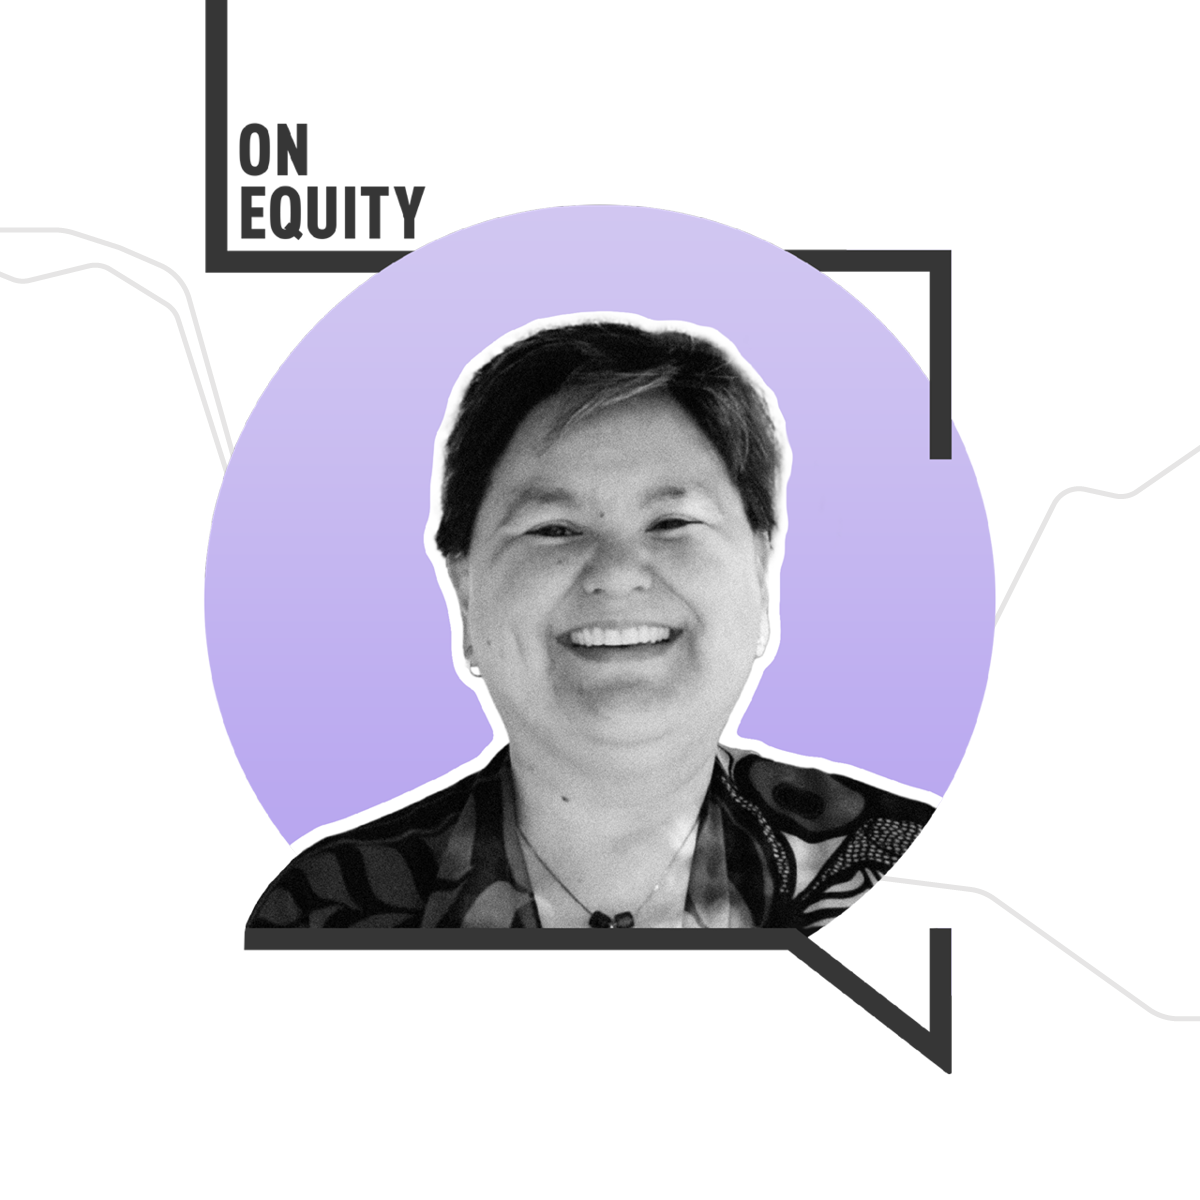 A black and white photograph of Sxwpilemaát Siyám (Chief Leanne Joe) in front of a light purple circle inside the black outline of a speech bubble, with the words “On Equity” in the top left corner.